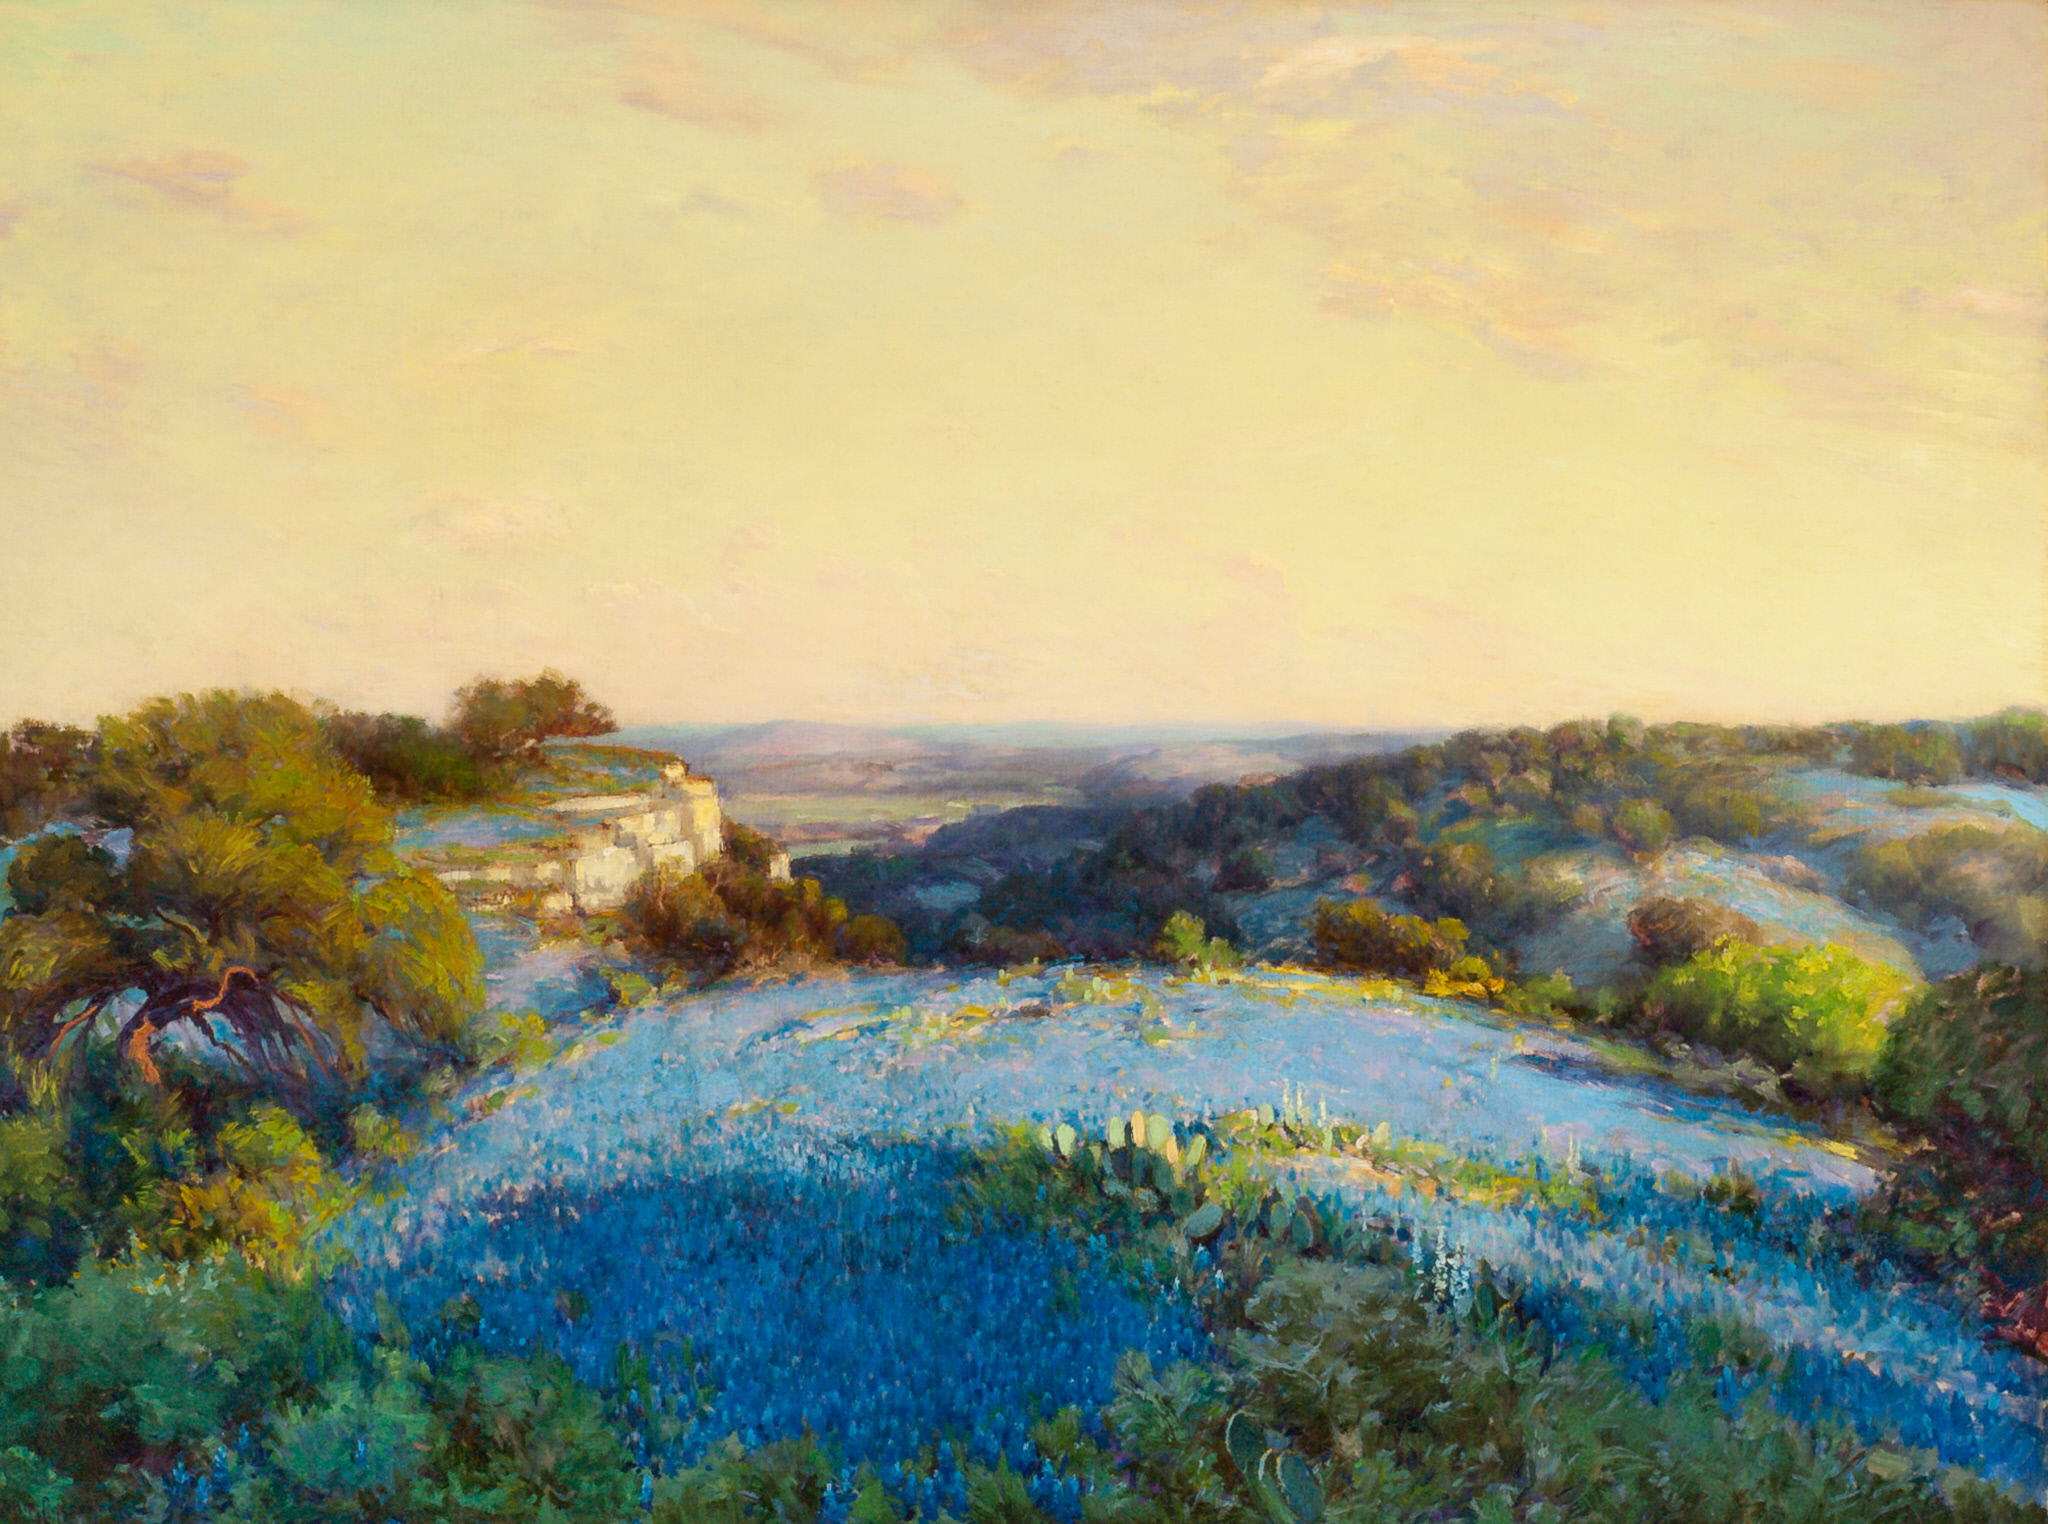 Image Title: Near San Antonio,Julian Onderdonk (American, 1882 - 1922), 1918, Oil on canvas, 30 3/4 × 41 in. (78.1 × 104.1 cm),Framed: 37 1/2 × 47 1/2 × 3 in. (95.3 × 120.7 × 7.6 cm), Gift of Mr. and Mrs. I.L. Ellwood, 84.103